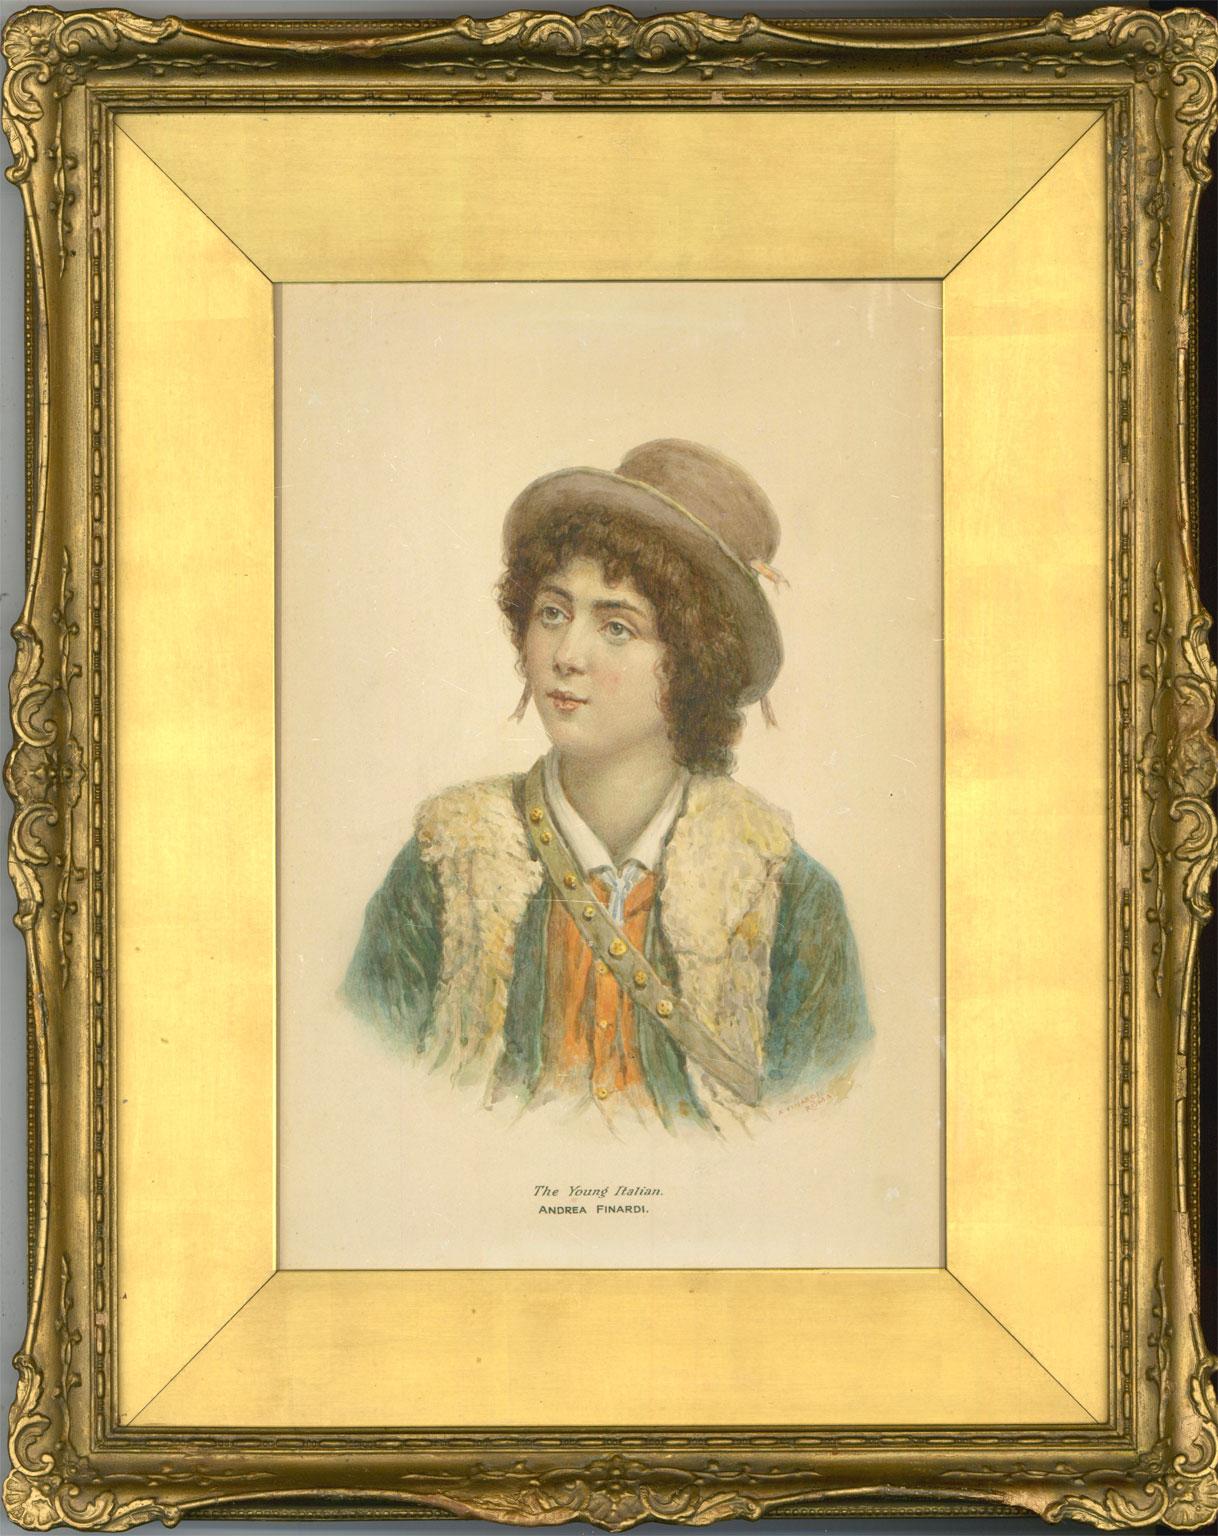 An impressive watercolour with fine detail depicting an Italian boy. Signed 'A. Finardi Roma' in the lower right and further inscribed with the title and artist to lower. Presented in an ornate gilt frame with gilt slip.